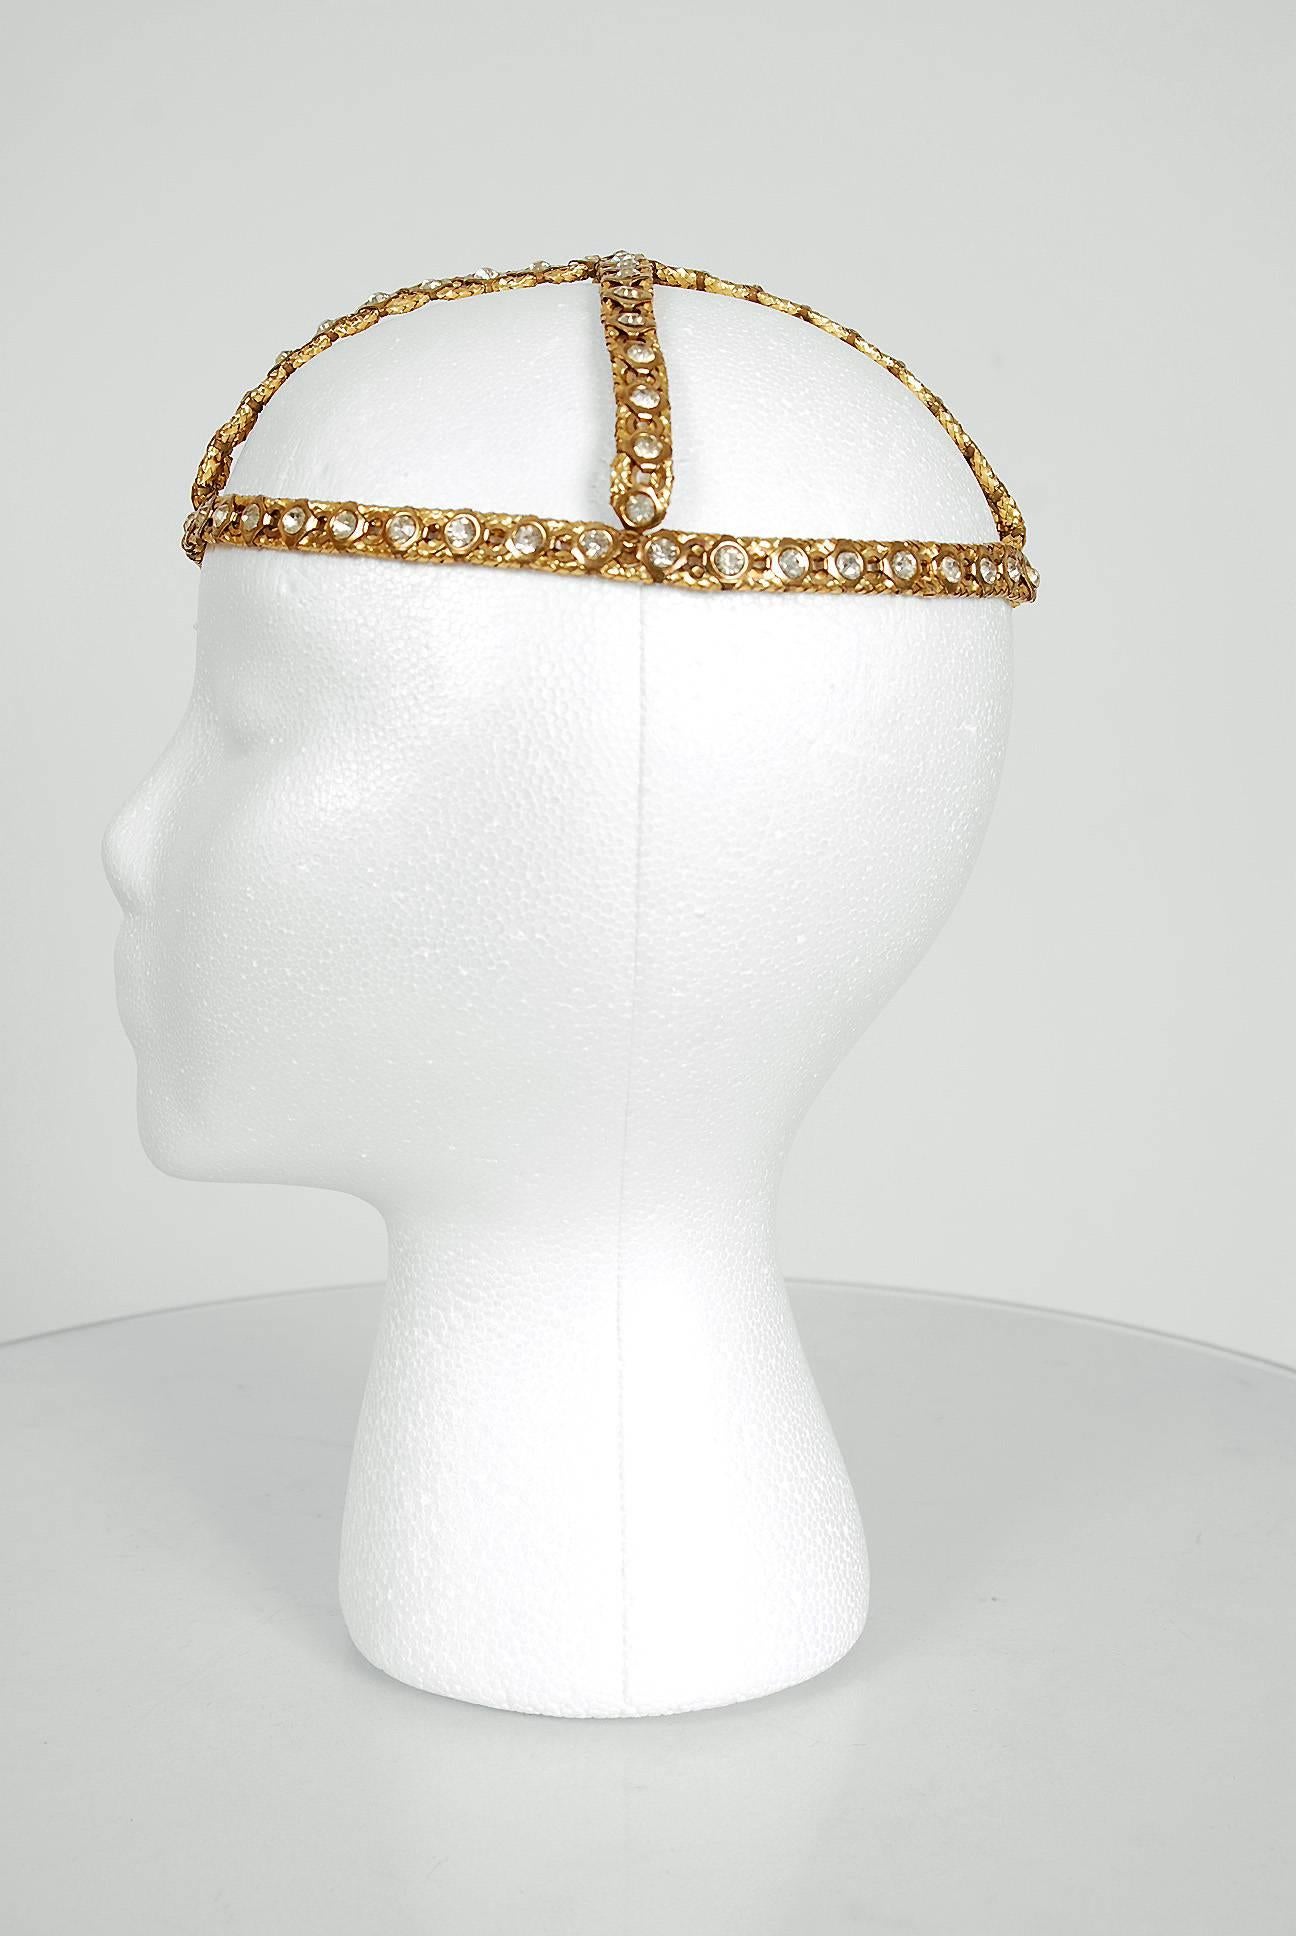 Opulent 1920's French metallic-gold brass and rhinestone flapper evening headpiece. This is, without a doubt, one of the most extraordinary antique Juliet caps I have ever laid eyes on. Prong-set rhinestones with tons of sparkle on gorgeous